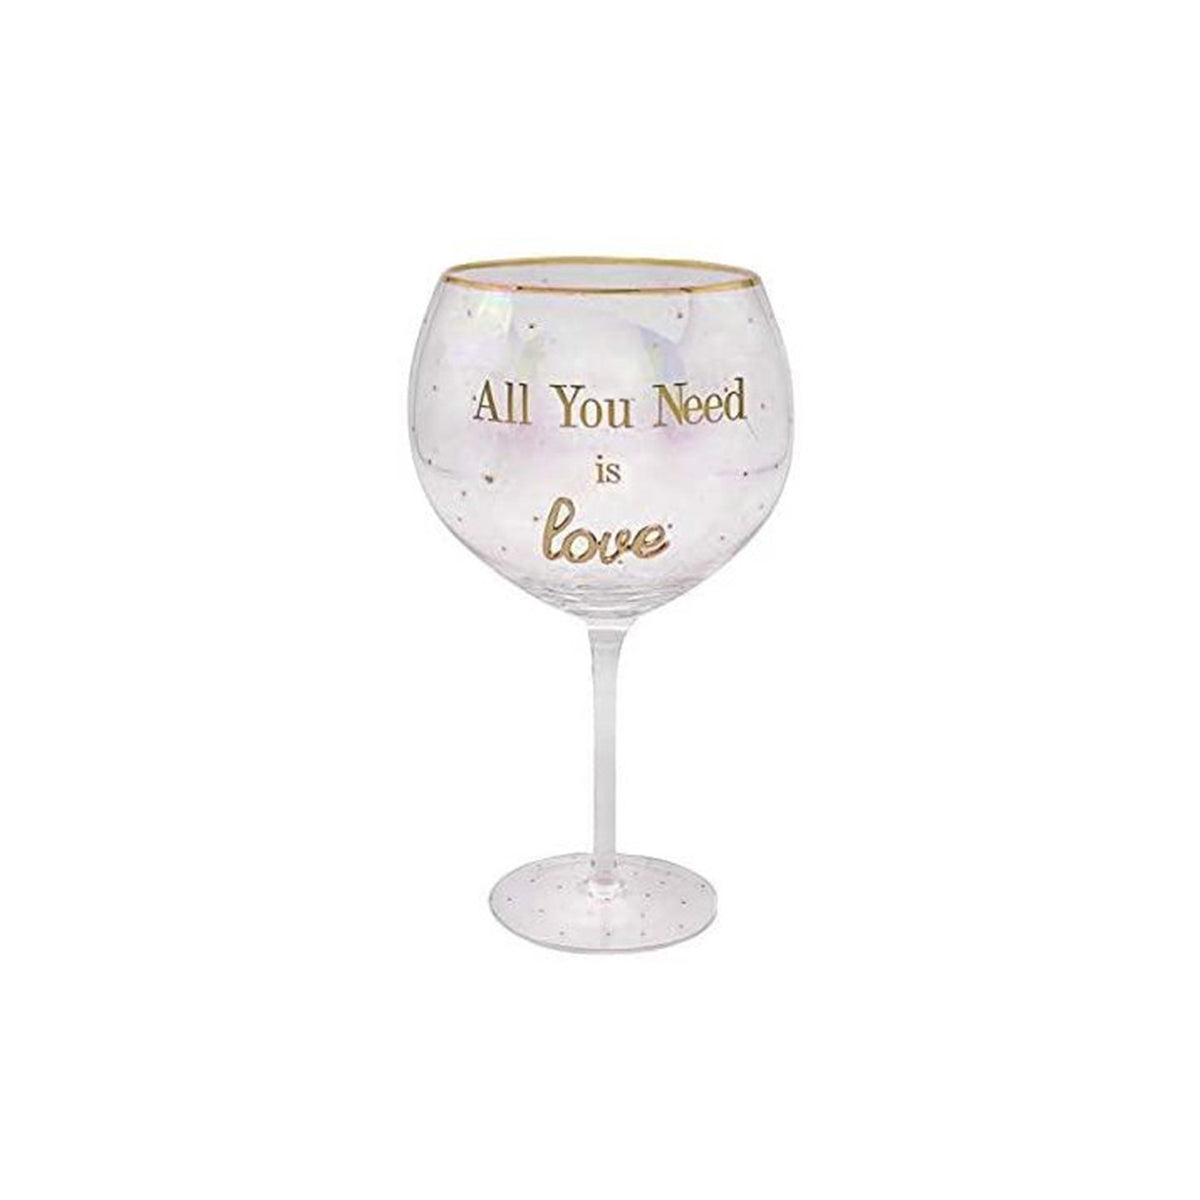 All You Need is Love Gin Glass